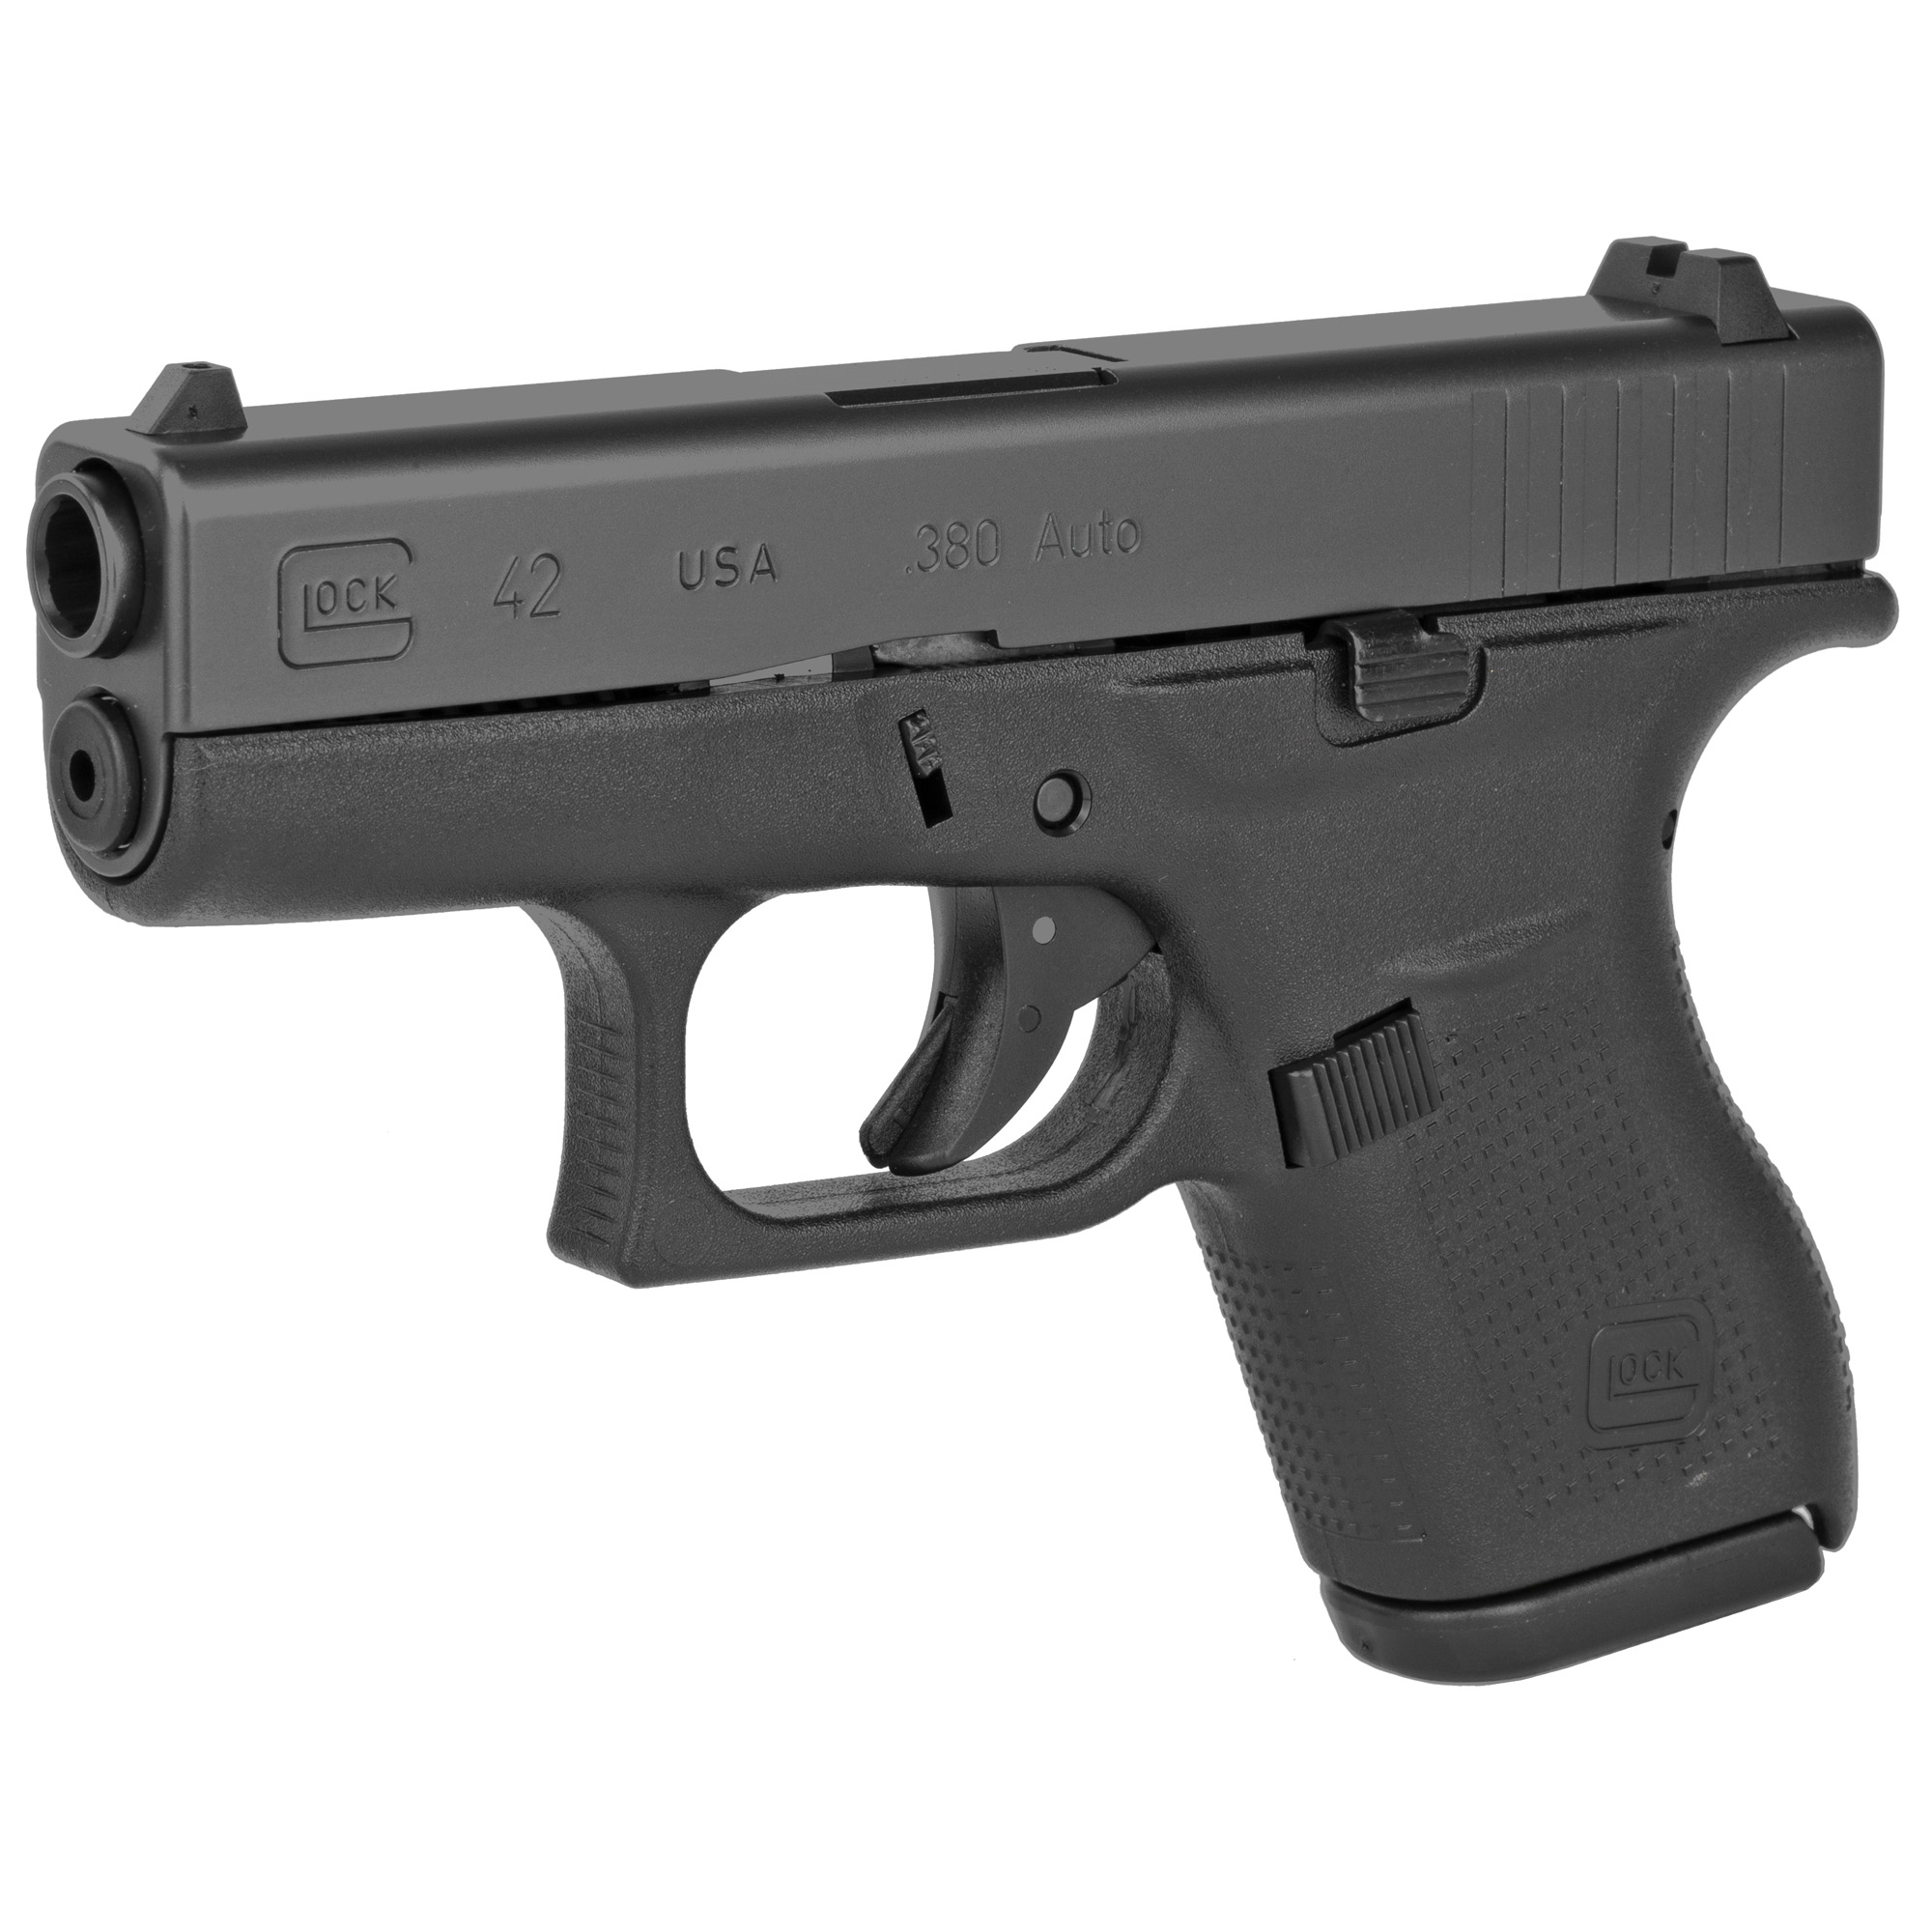 Glock, 42, Striker Fired, Semi-automatic, Polymer Frame Pistol, Sub-Compact, 380 ACP, 3.25" Barrel, Matte Finish, Black, No Finger Grooves, Fixed Sights, 6 Rounds, 2 Magazines